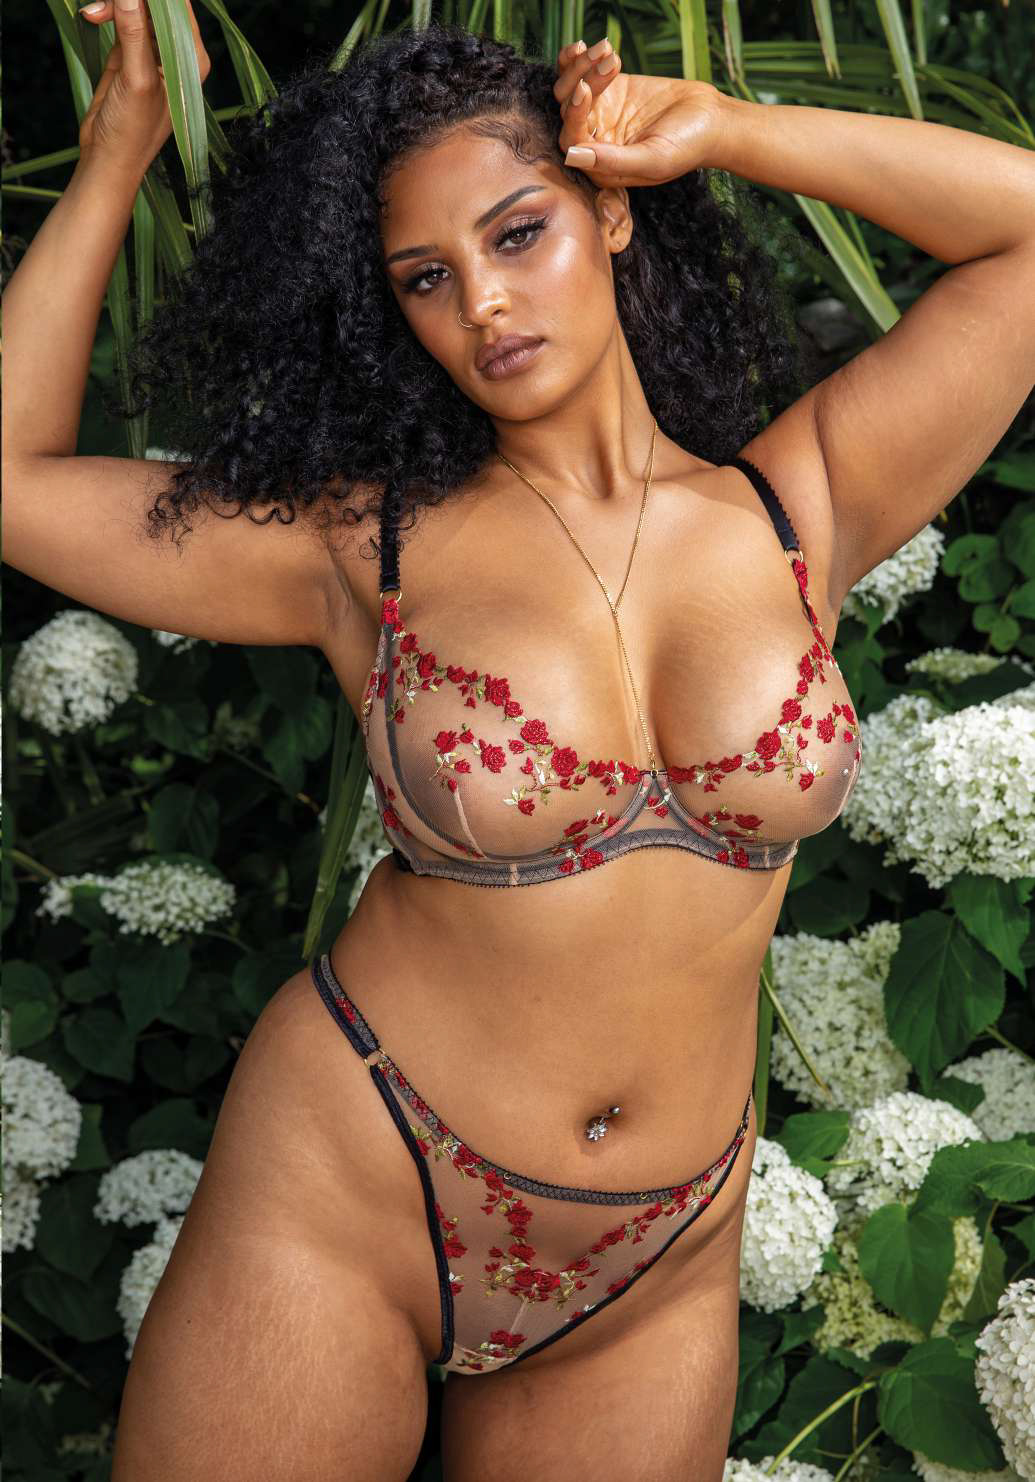 Off the Rack ~ Introducing Edge o' Beyond Luxury Full-Bust Lingerie –